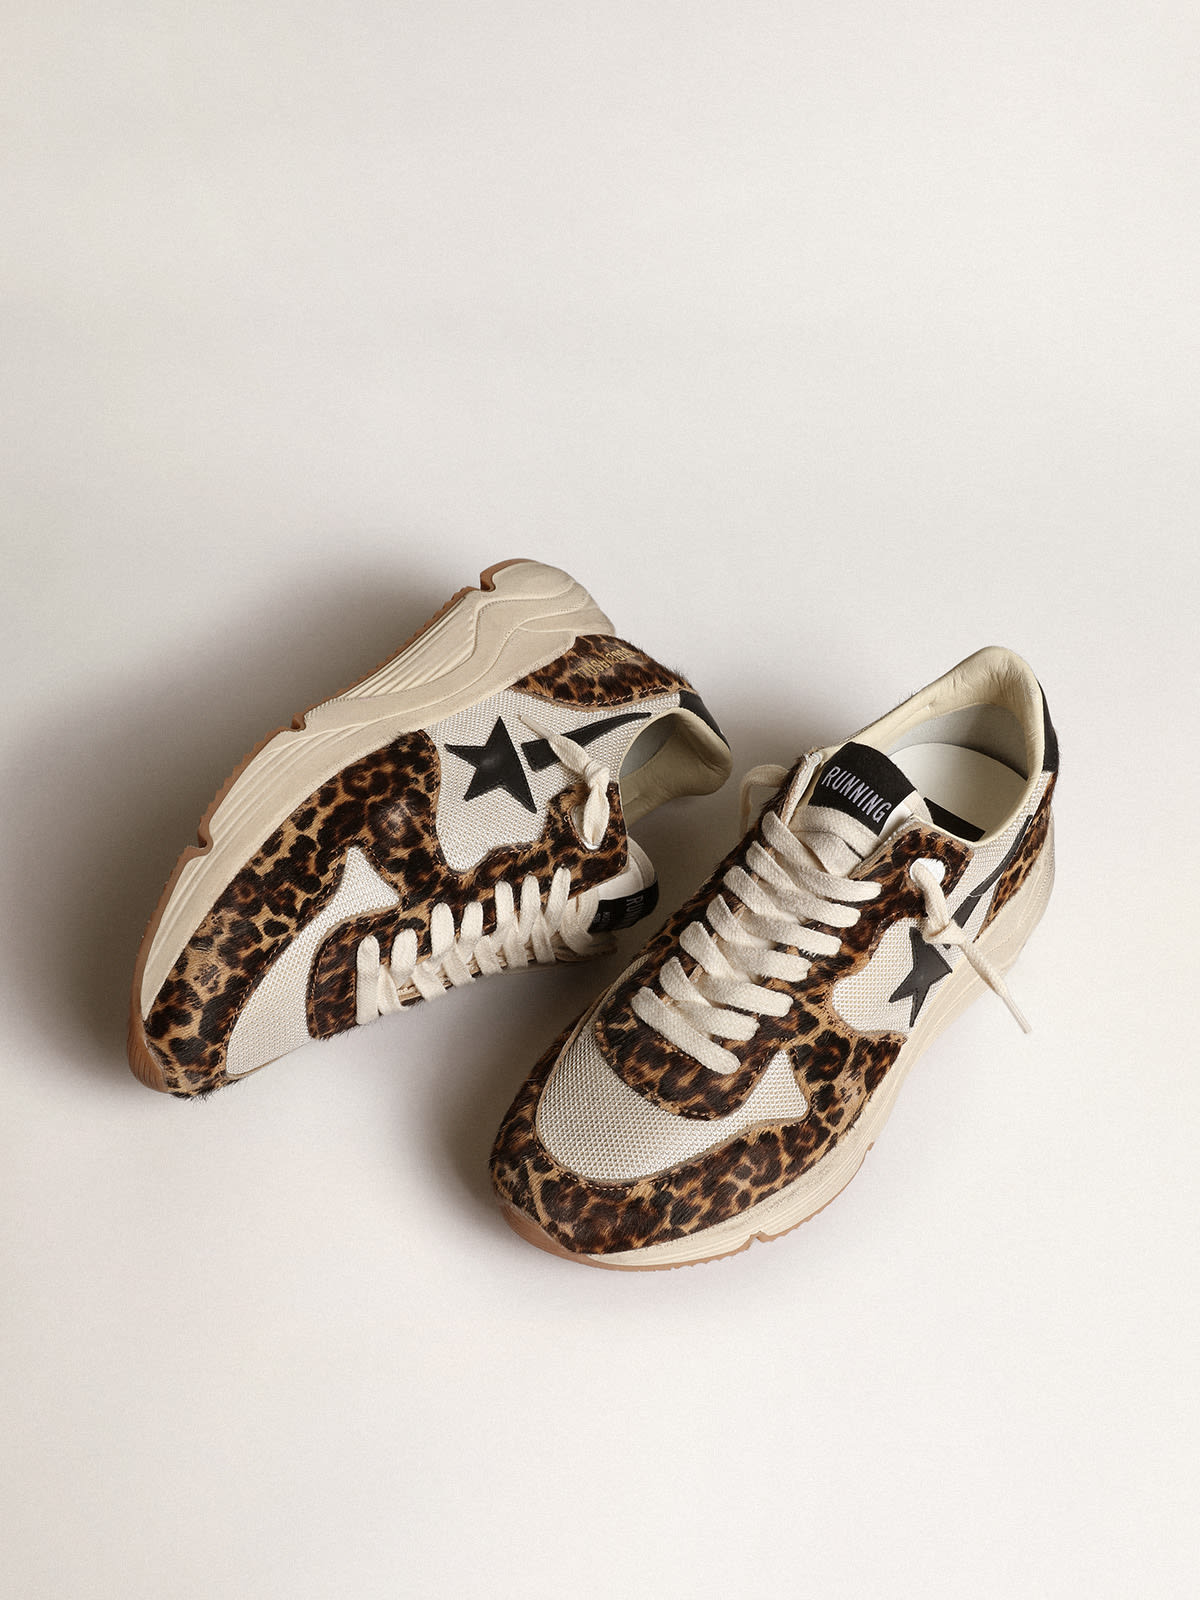 Golden Goose - Running Sole sneakers in cream-colored mesh with leopard-print pony skin inserts and black leather star in 